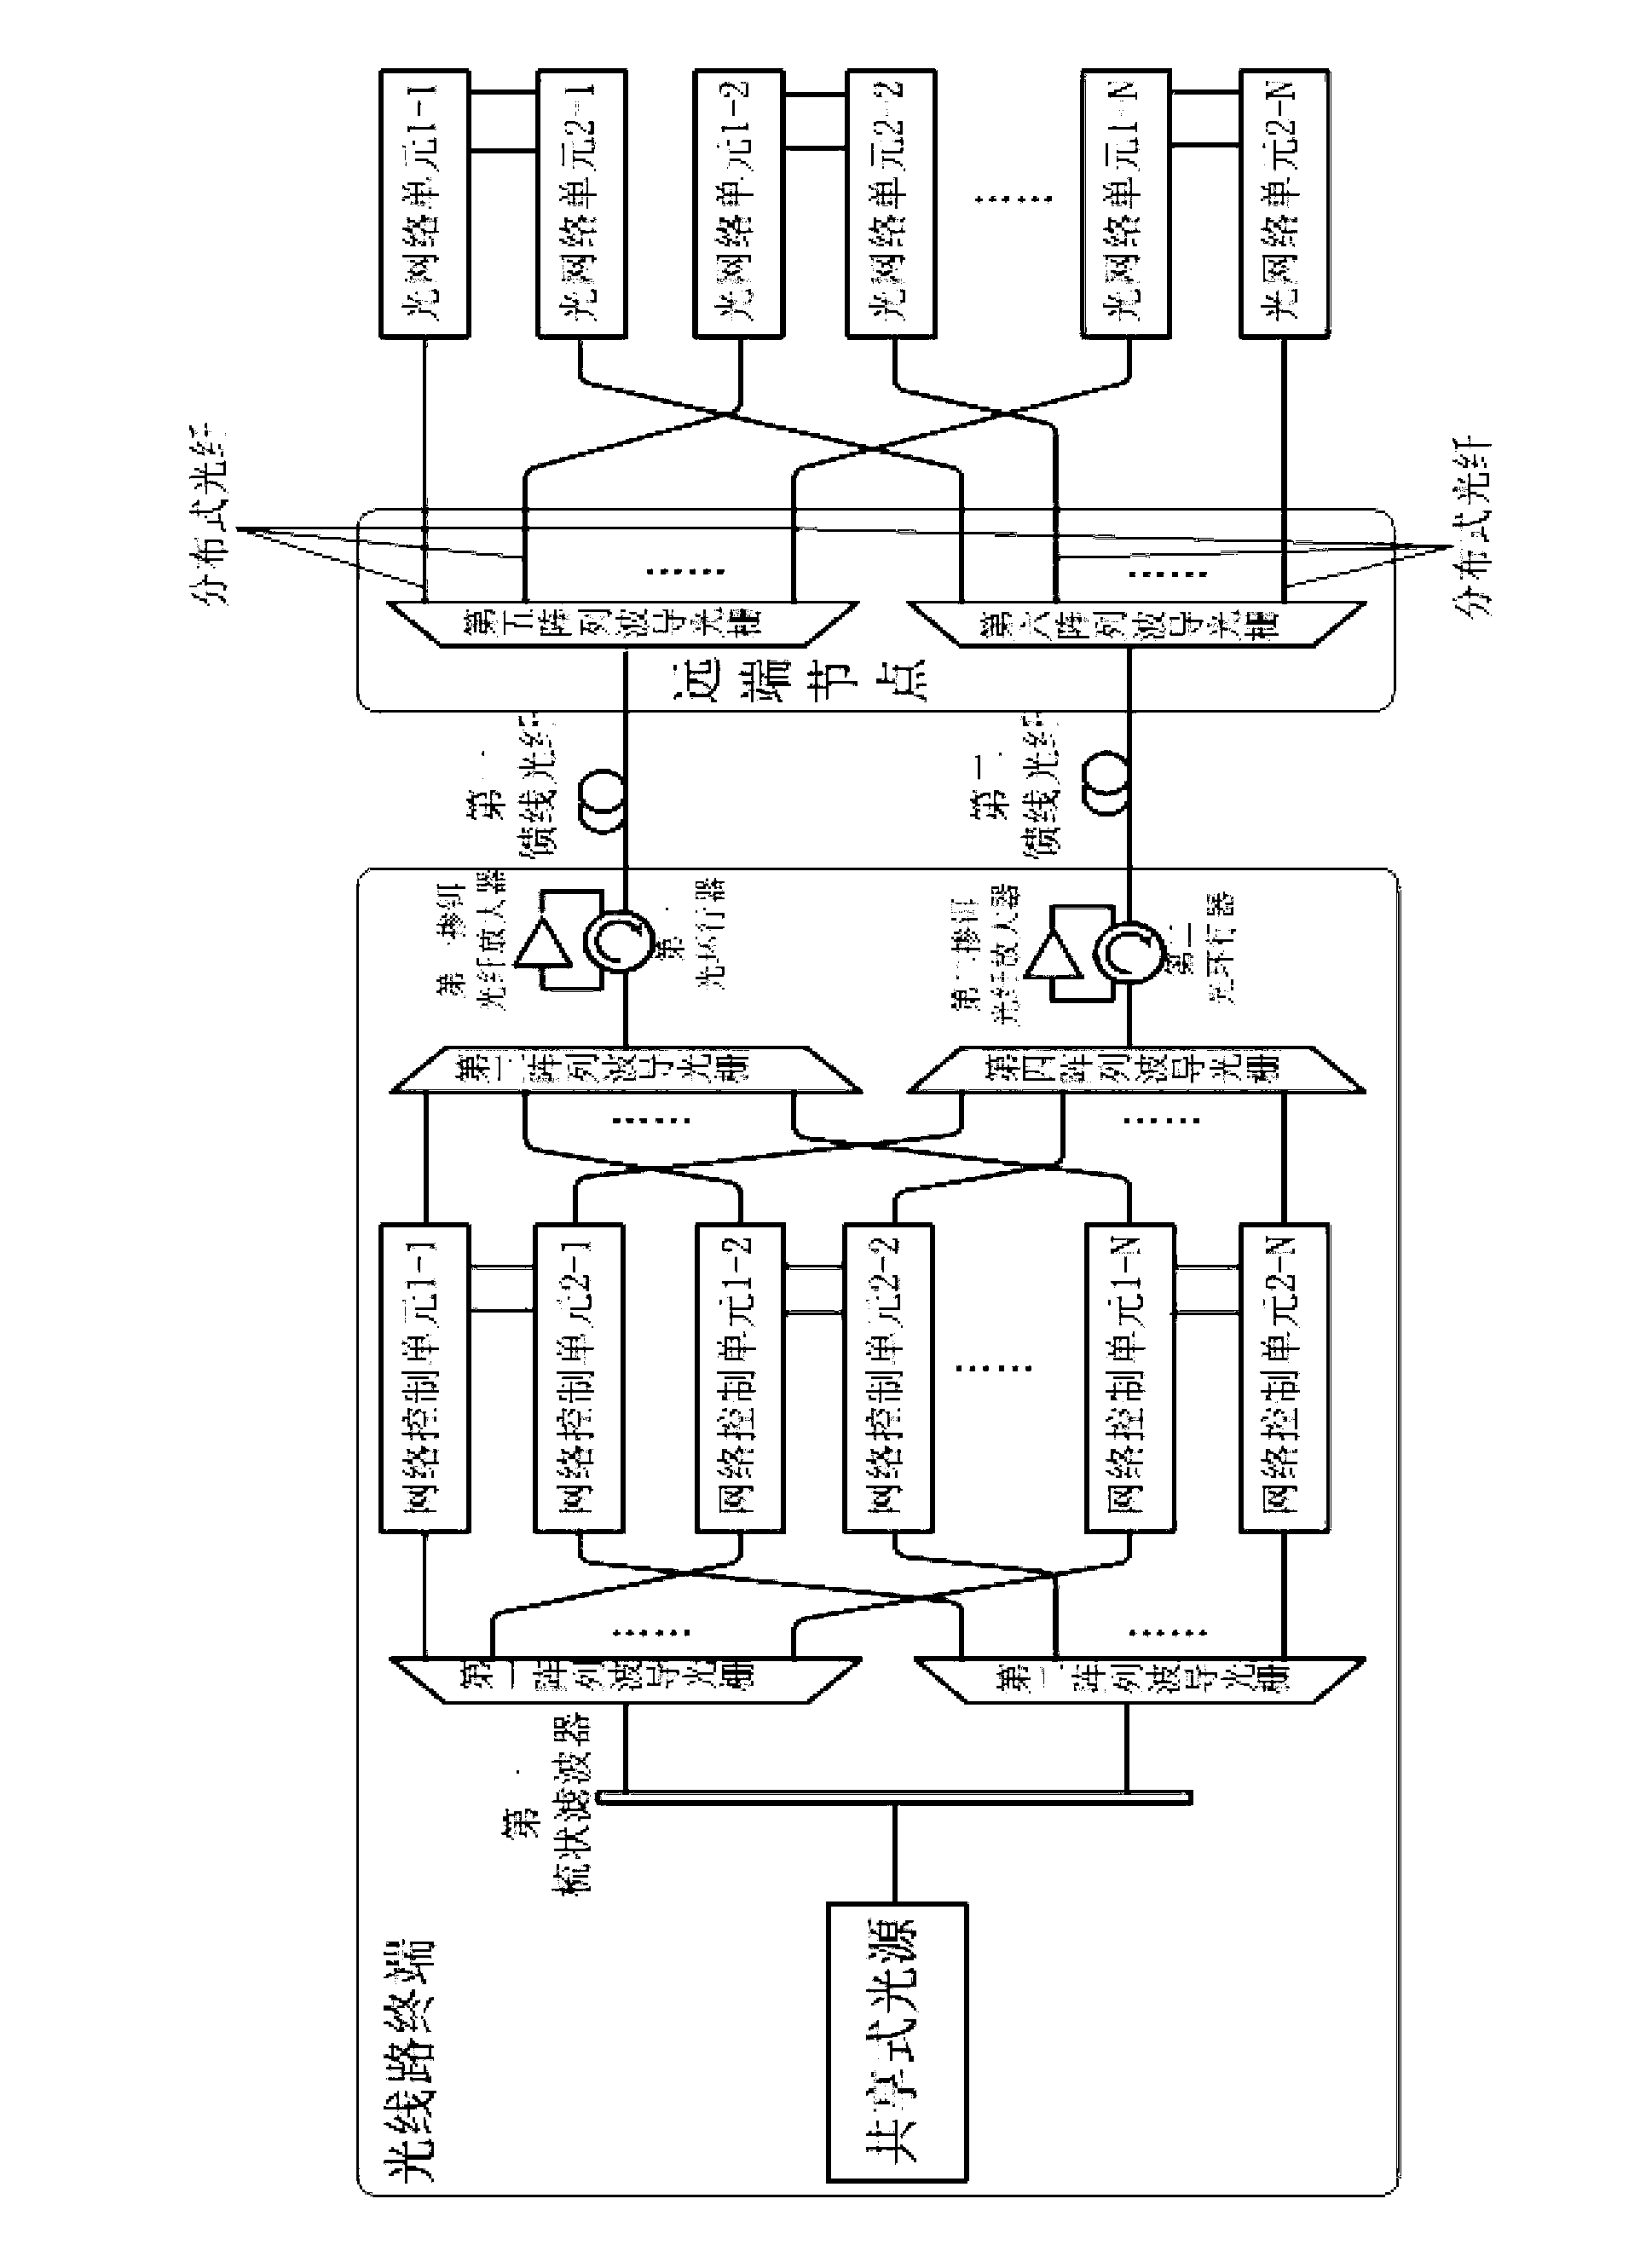 WDM-PON (wavelength-division-multiplexing passive optical network) system based on resource sharing protecting mechanism and method for protecting WDM-PON system based on resource sharing protecting mechanism